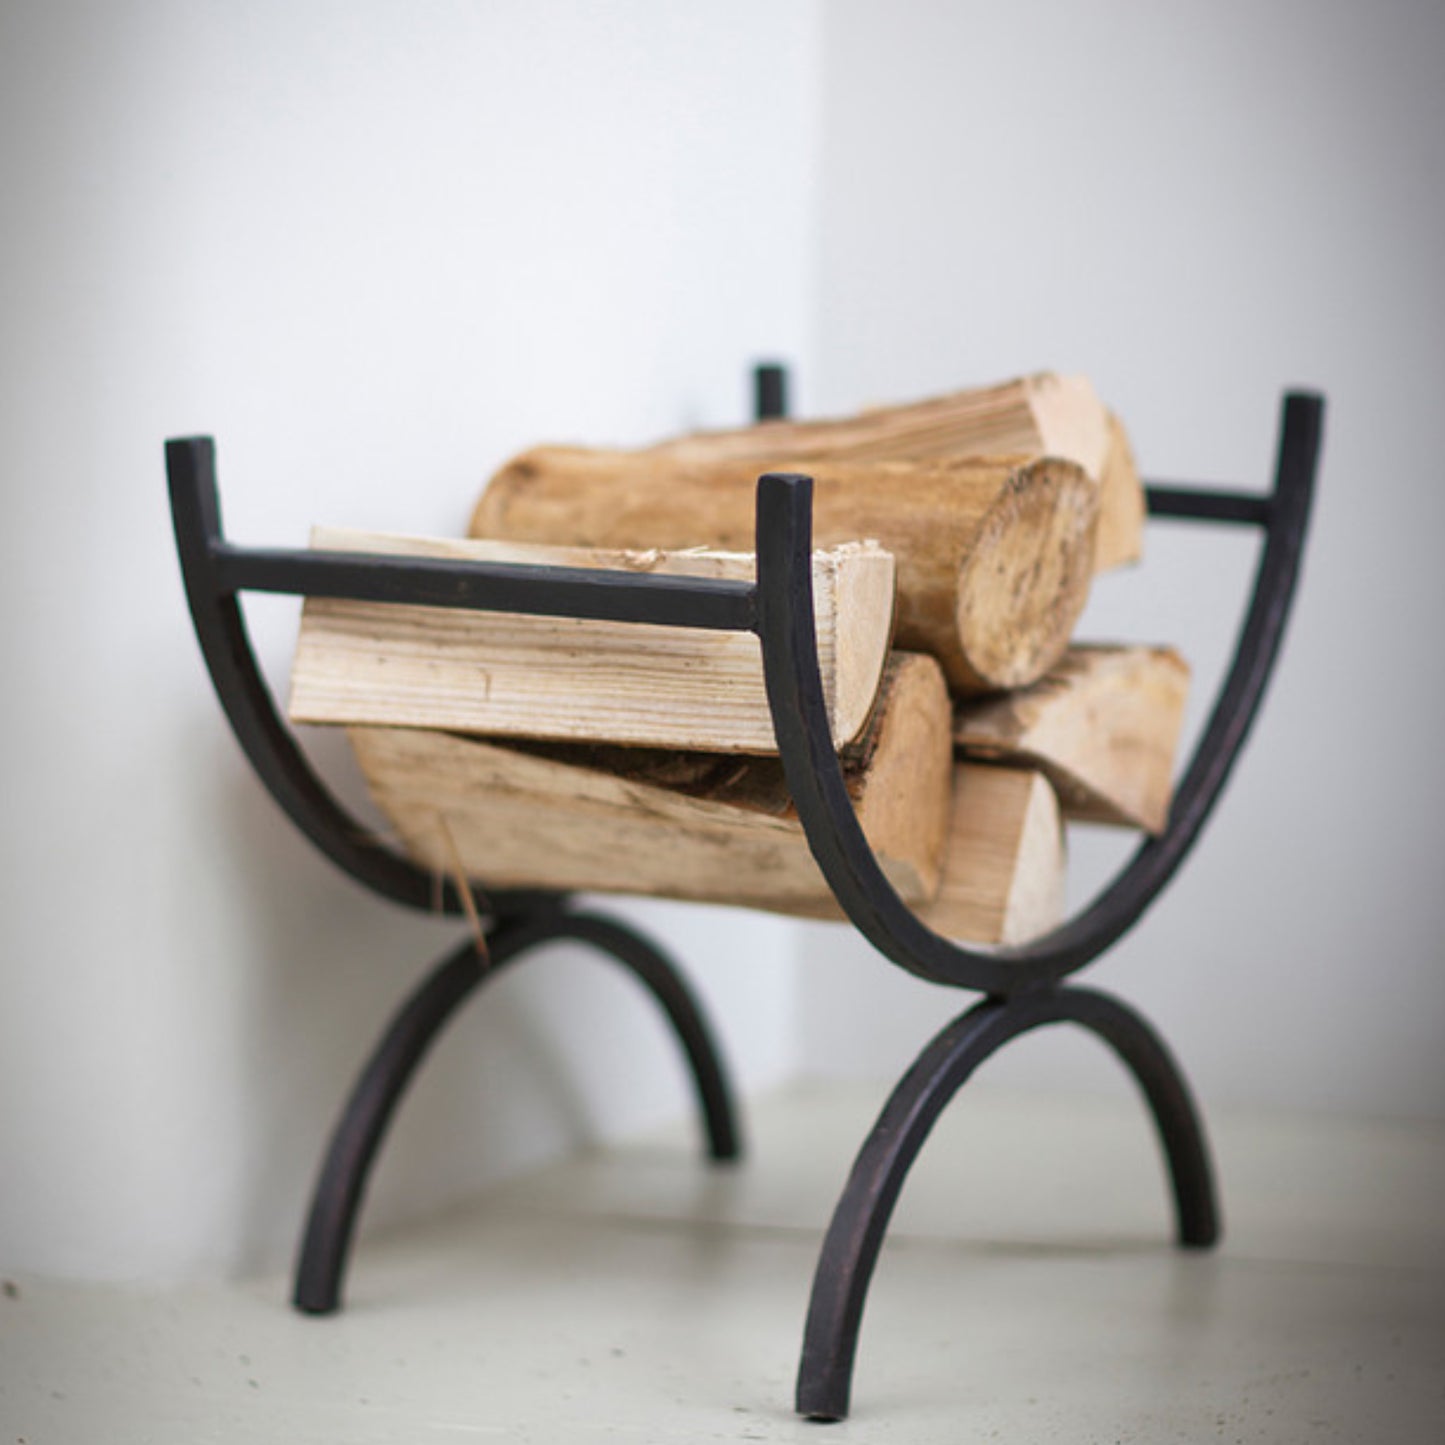 Small Log Holder by Garden Trading - Wrought Iron